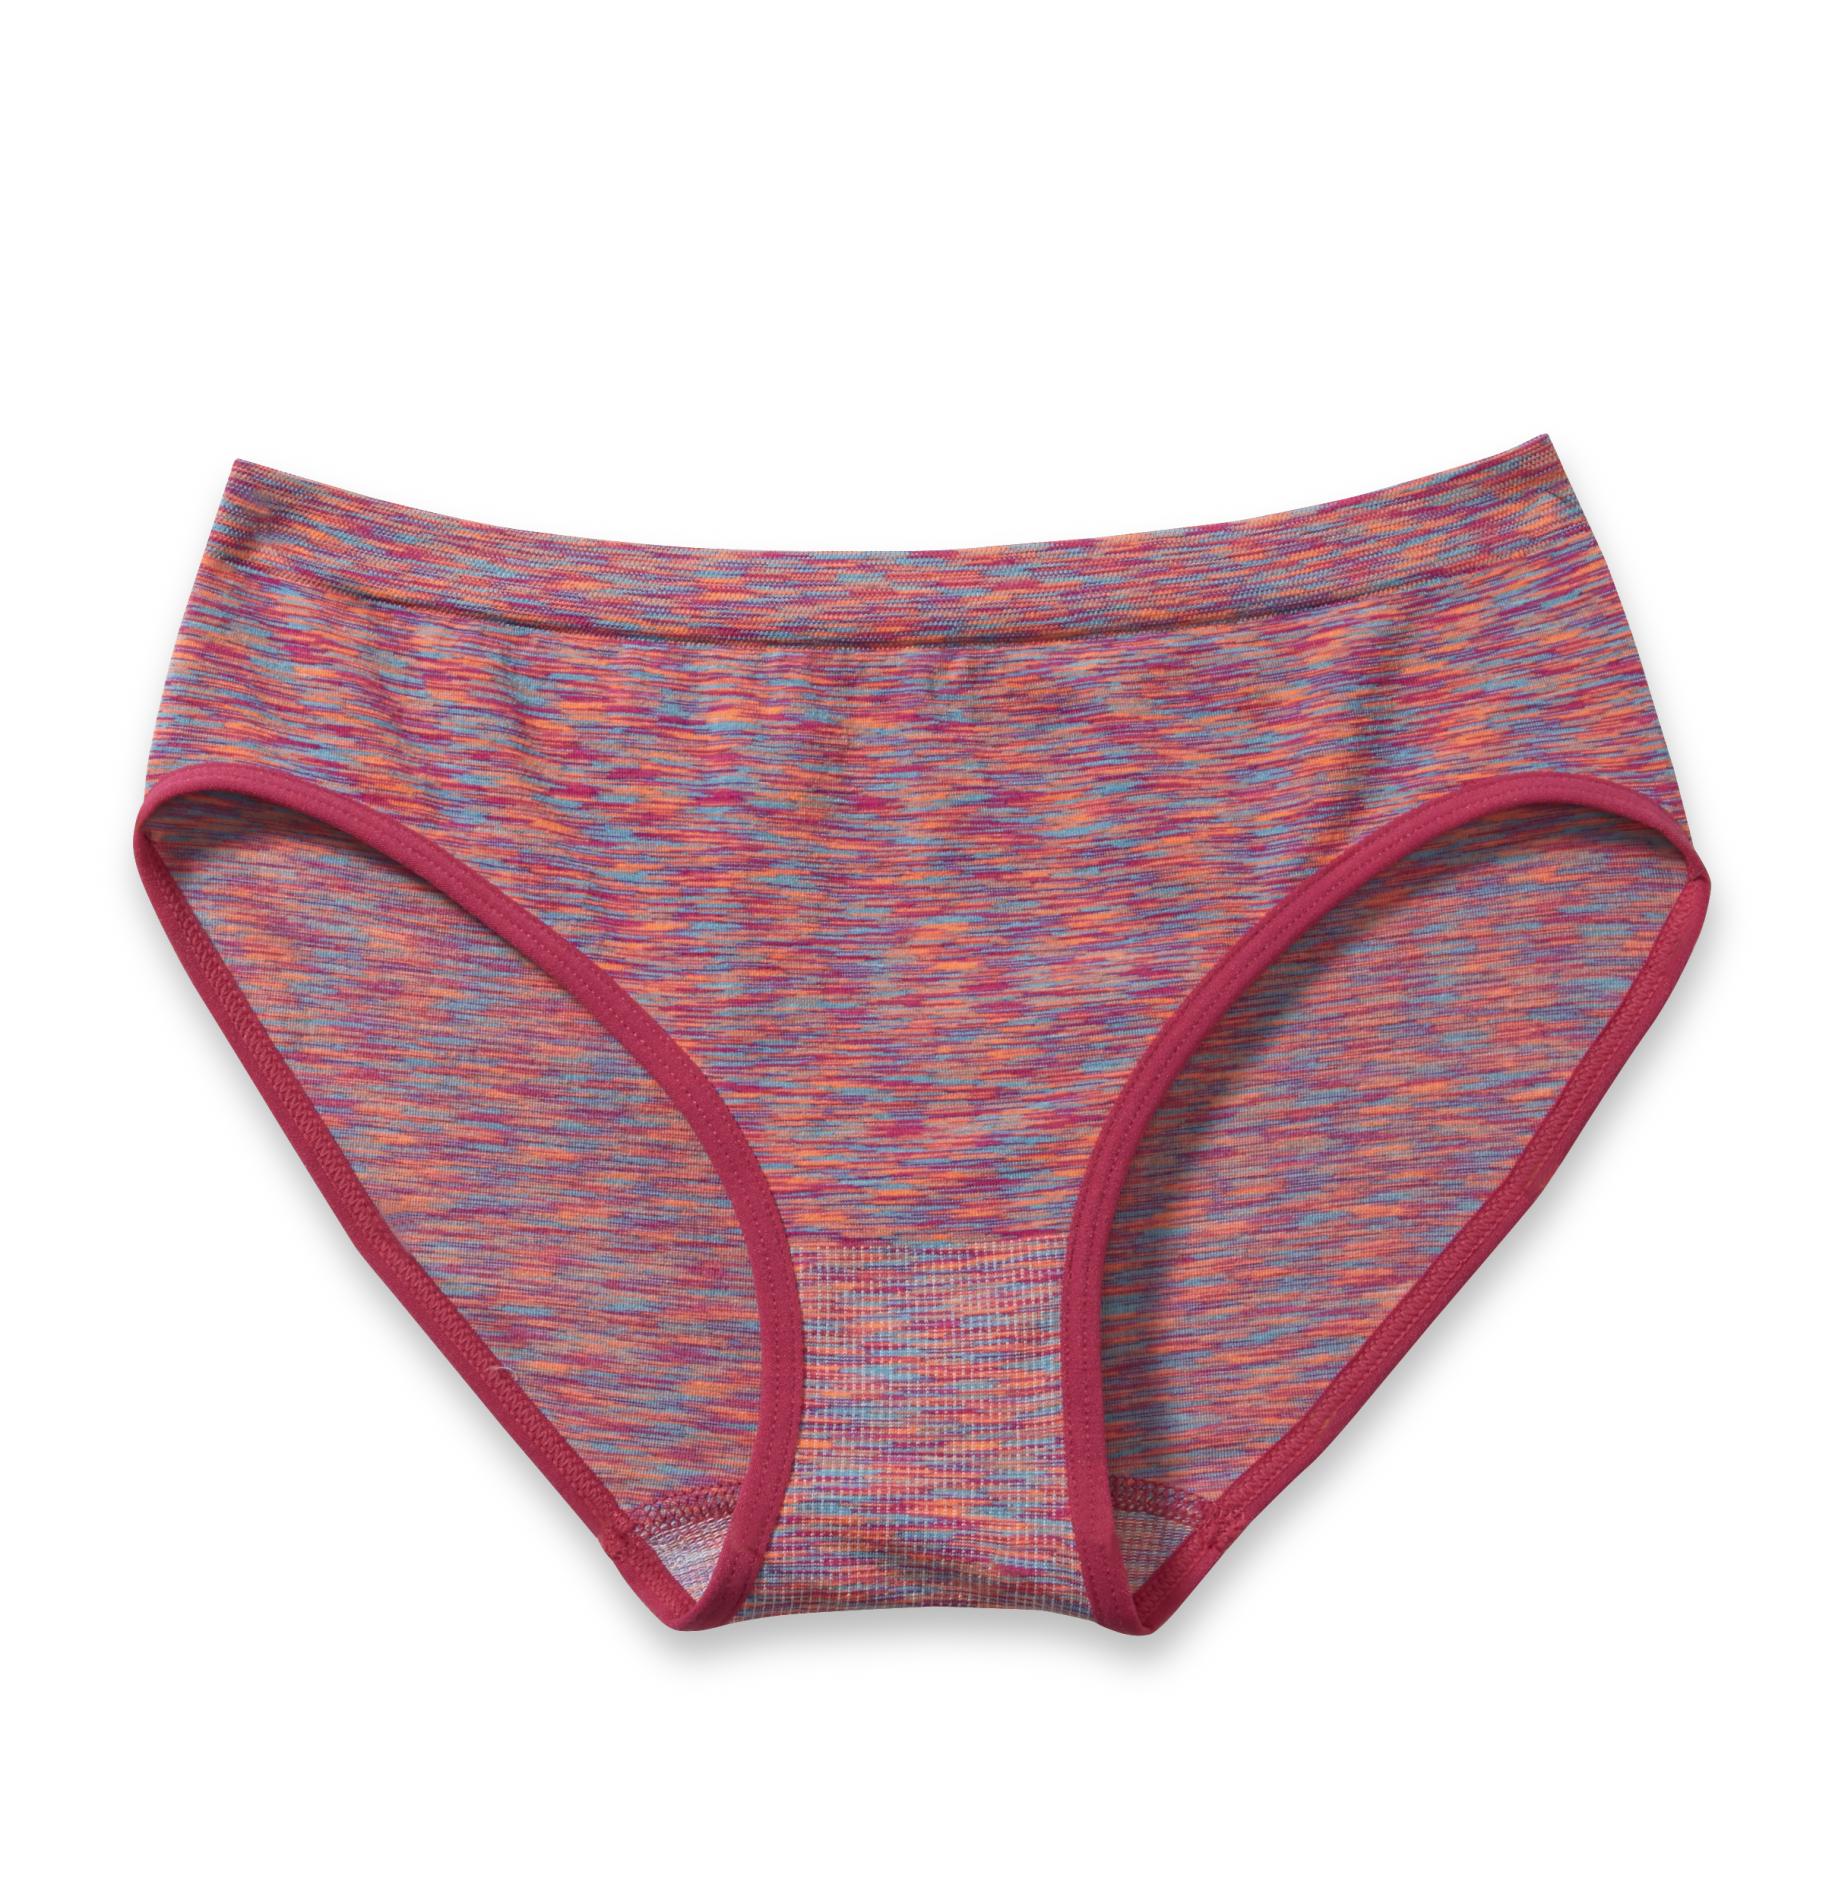 Maidenform Girl's Hipster Panties - Space-Dyed